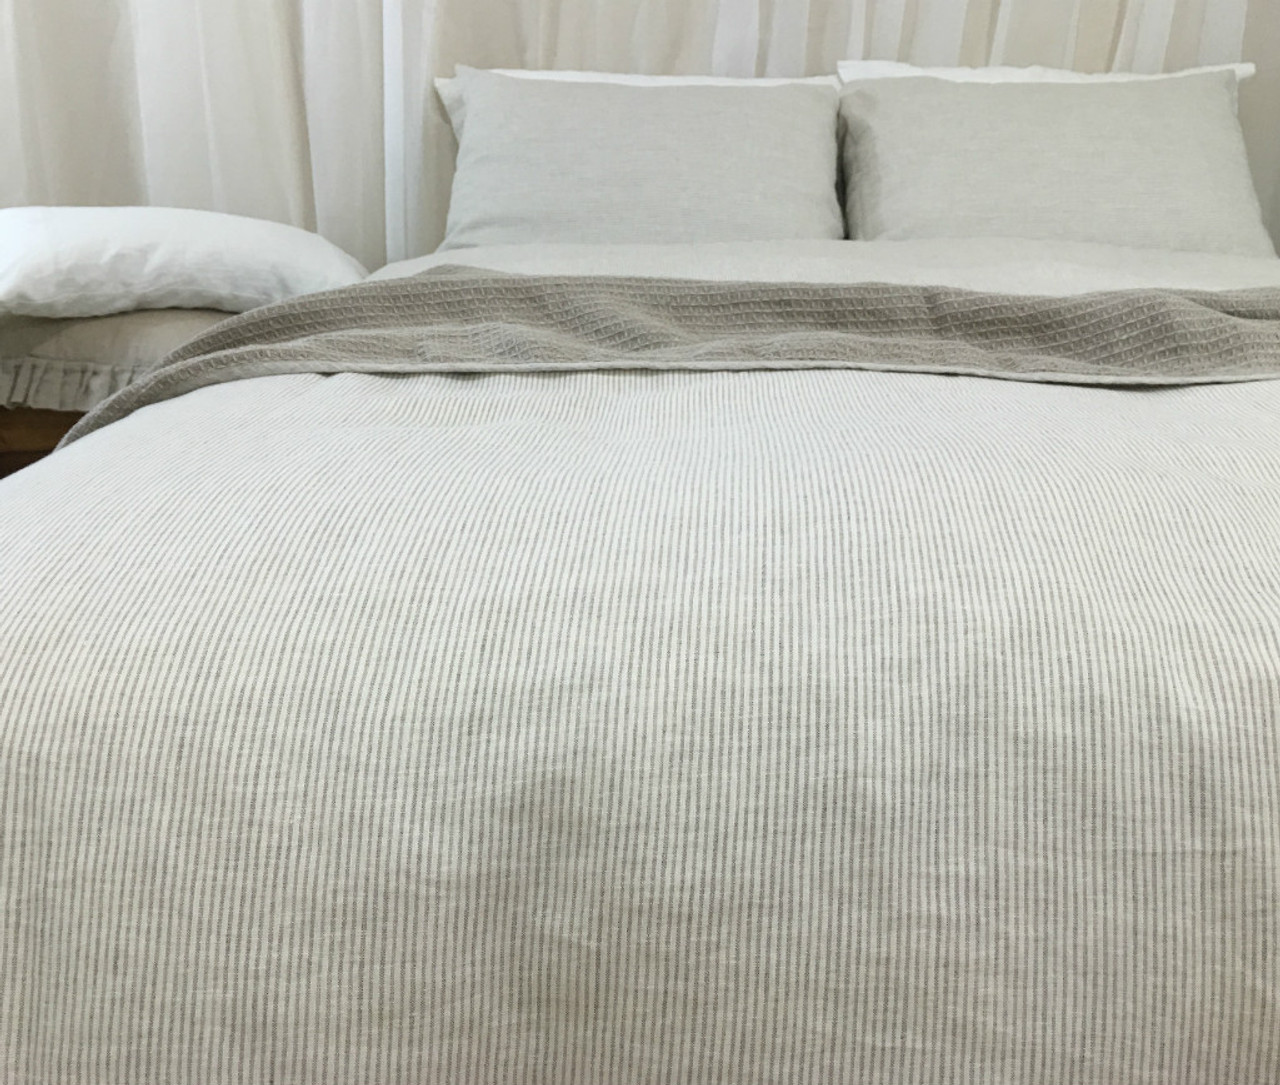 Classic Ticking Stripe Duvet Cover Handcrafted By Superior